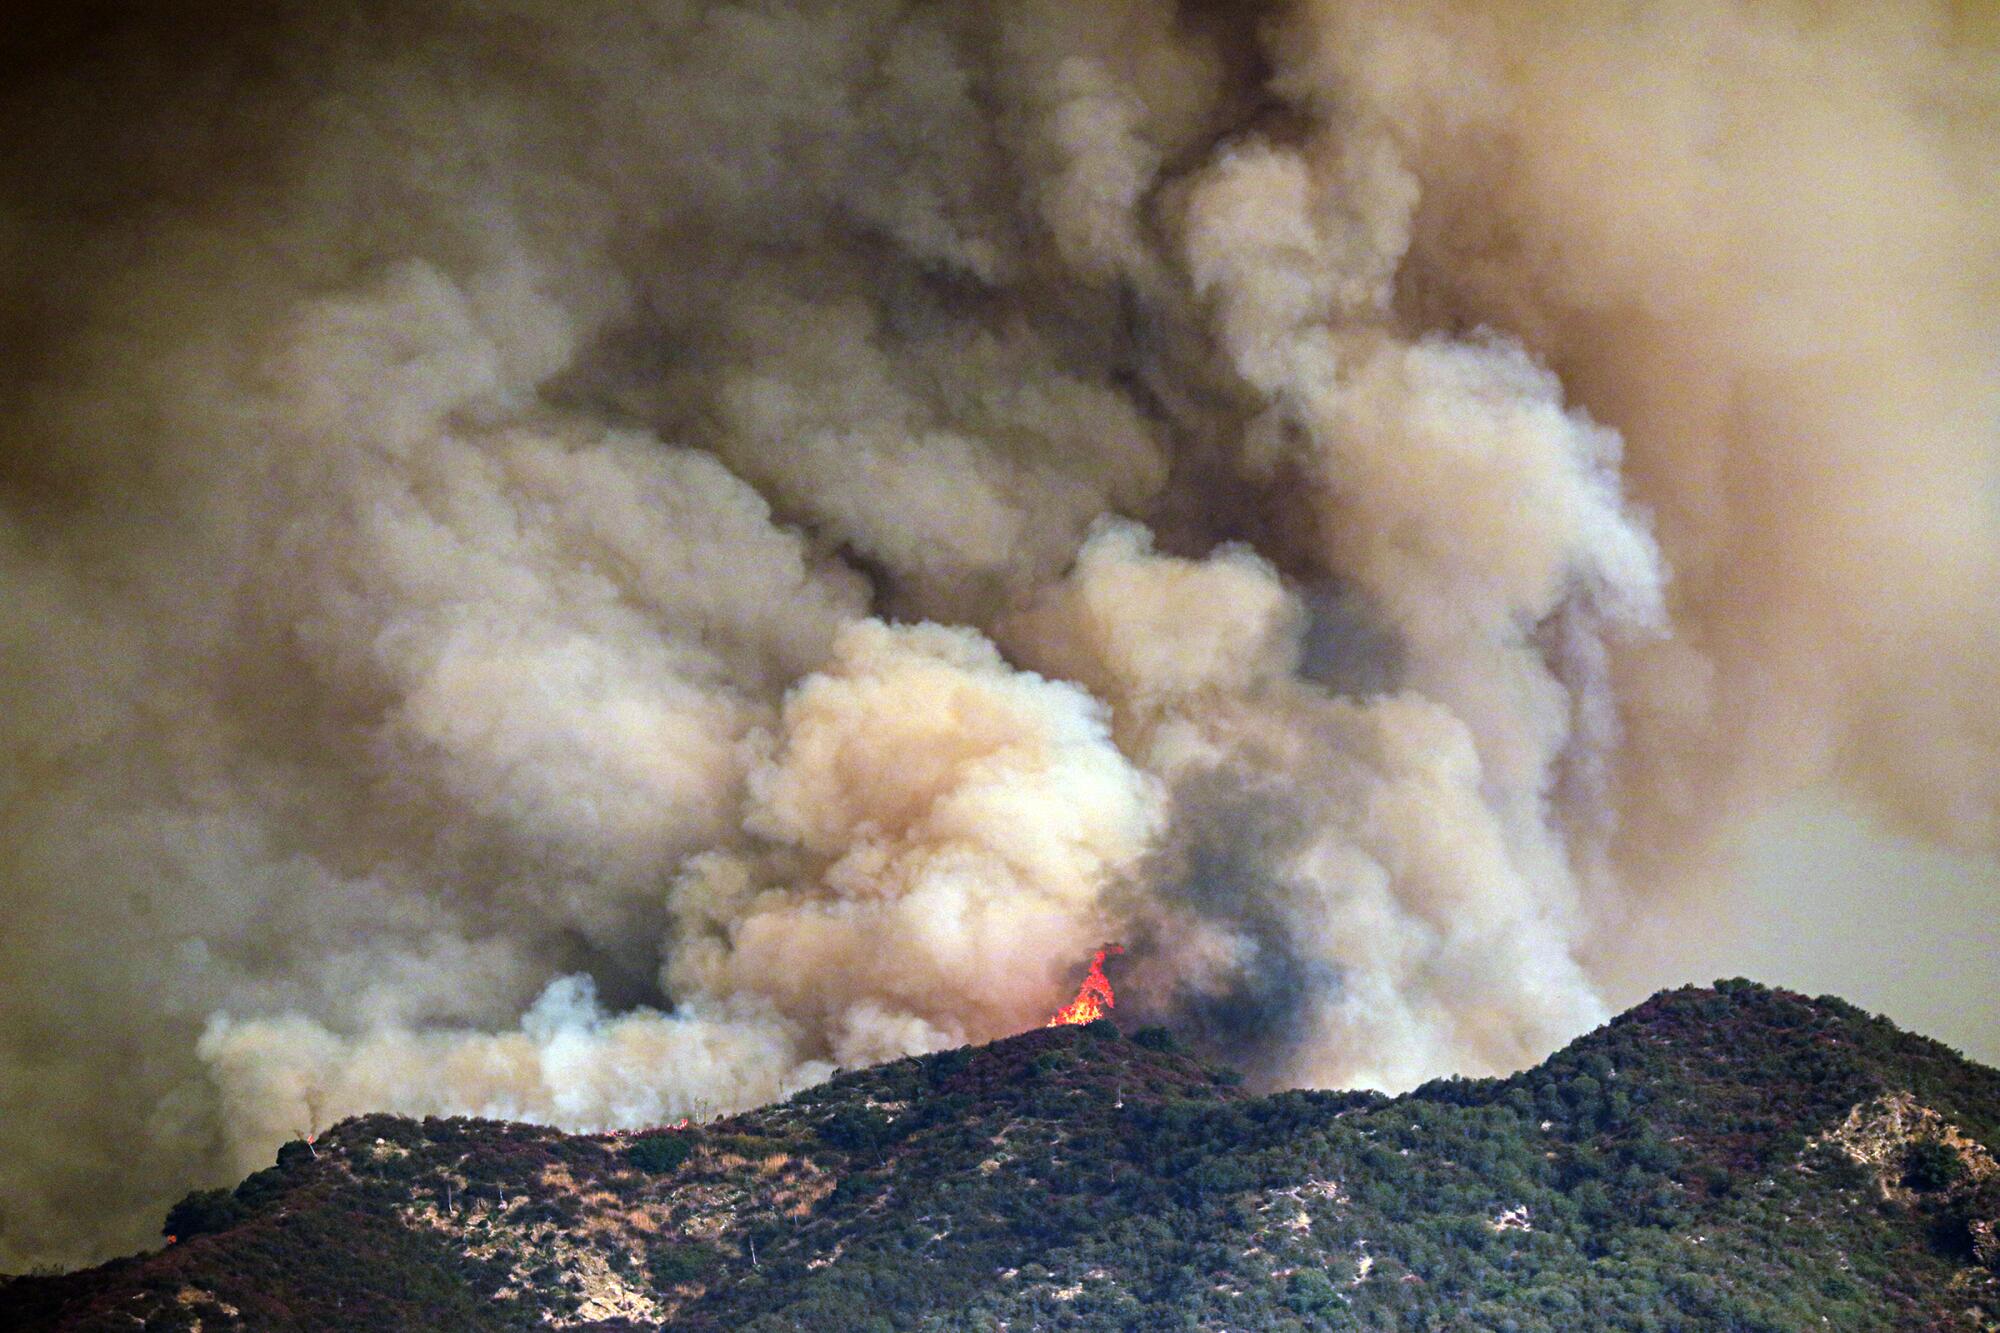 The Bobcat fire rages above Rincon Fire Station on Highway 39 in the San Gabriel Mountains.